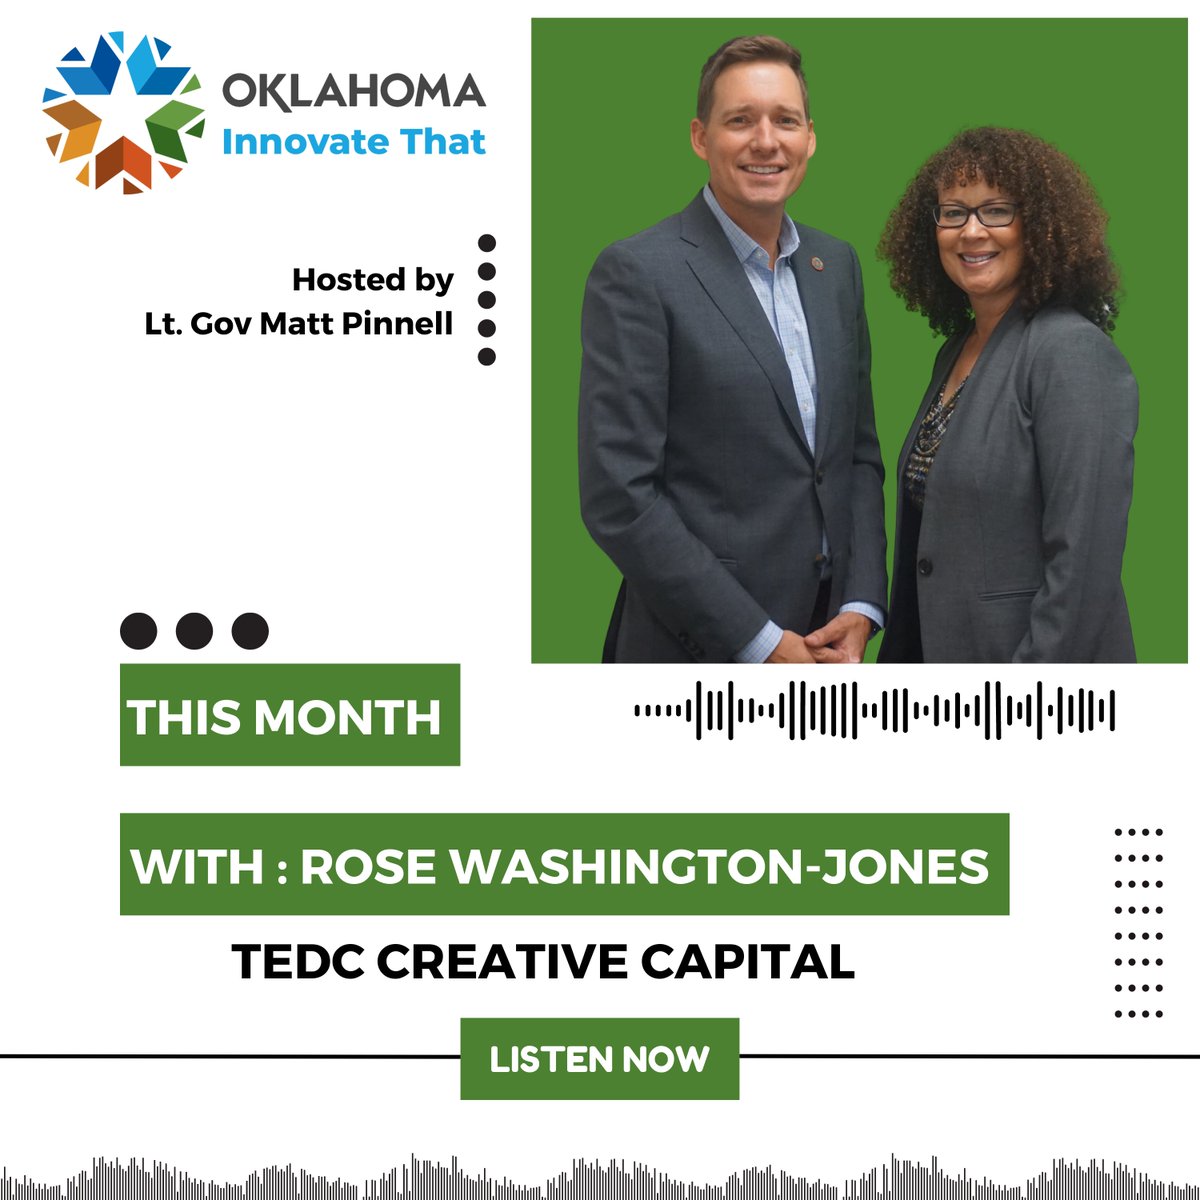 Episode 2 is now live. This episode explores partnerships with TEDC Creative Capital, innovation support, and key initiatives like the U.S. Treasury State Small Business Credit Initiative. podbean.com/ep/pb-s5qmi-14… Powered by @OCAST #innovatethat #ocastok #podcast